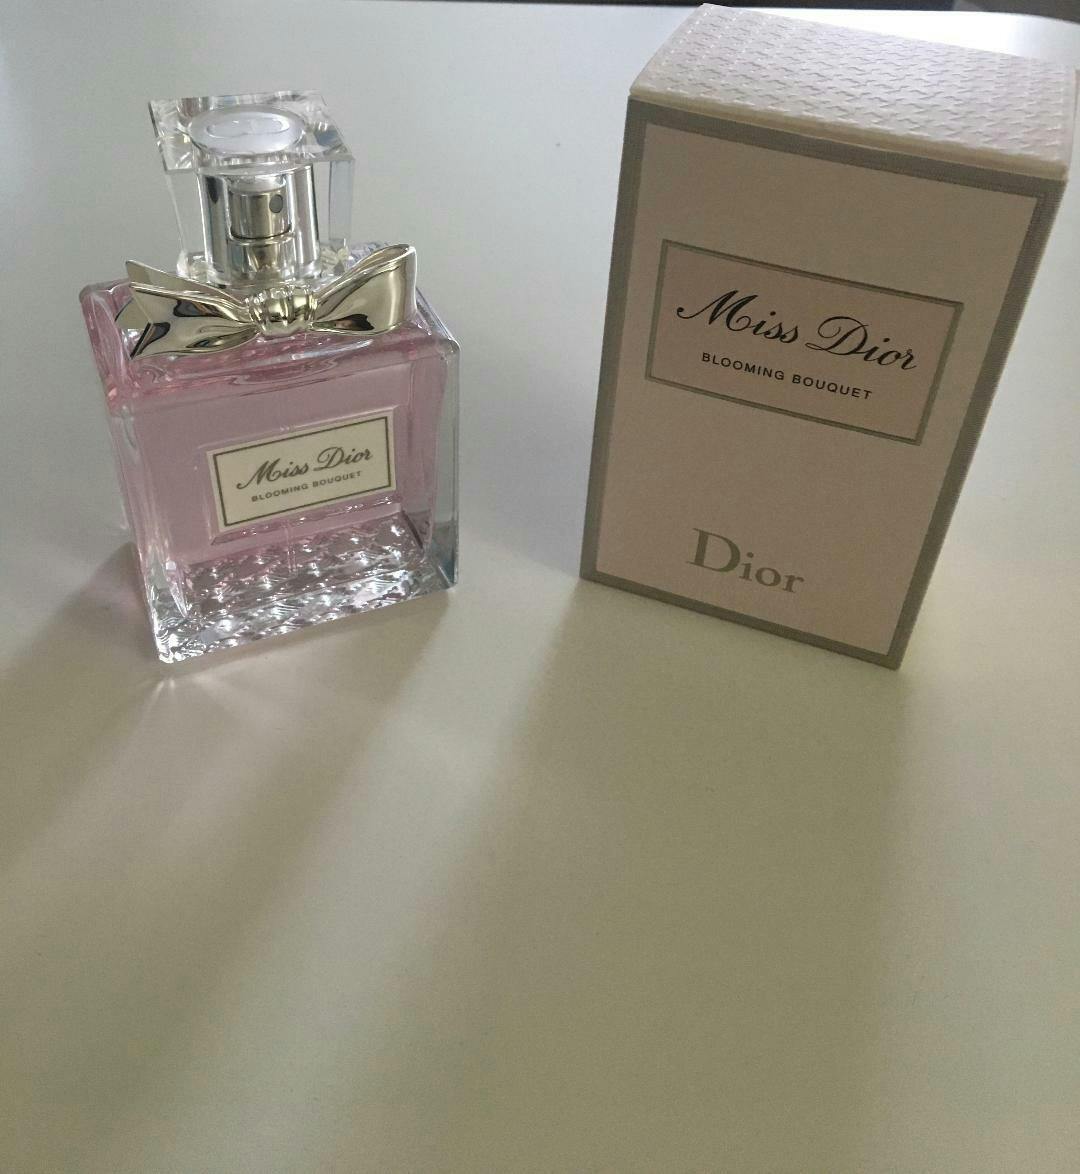 Dior Miss Dior Blooming Bouquet Perfume for Women in Canada